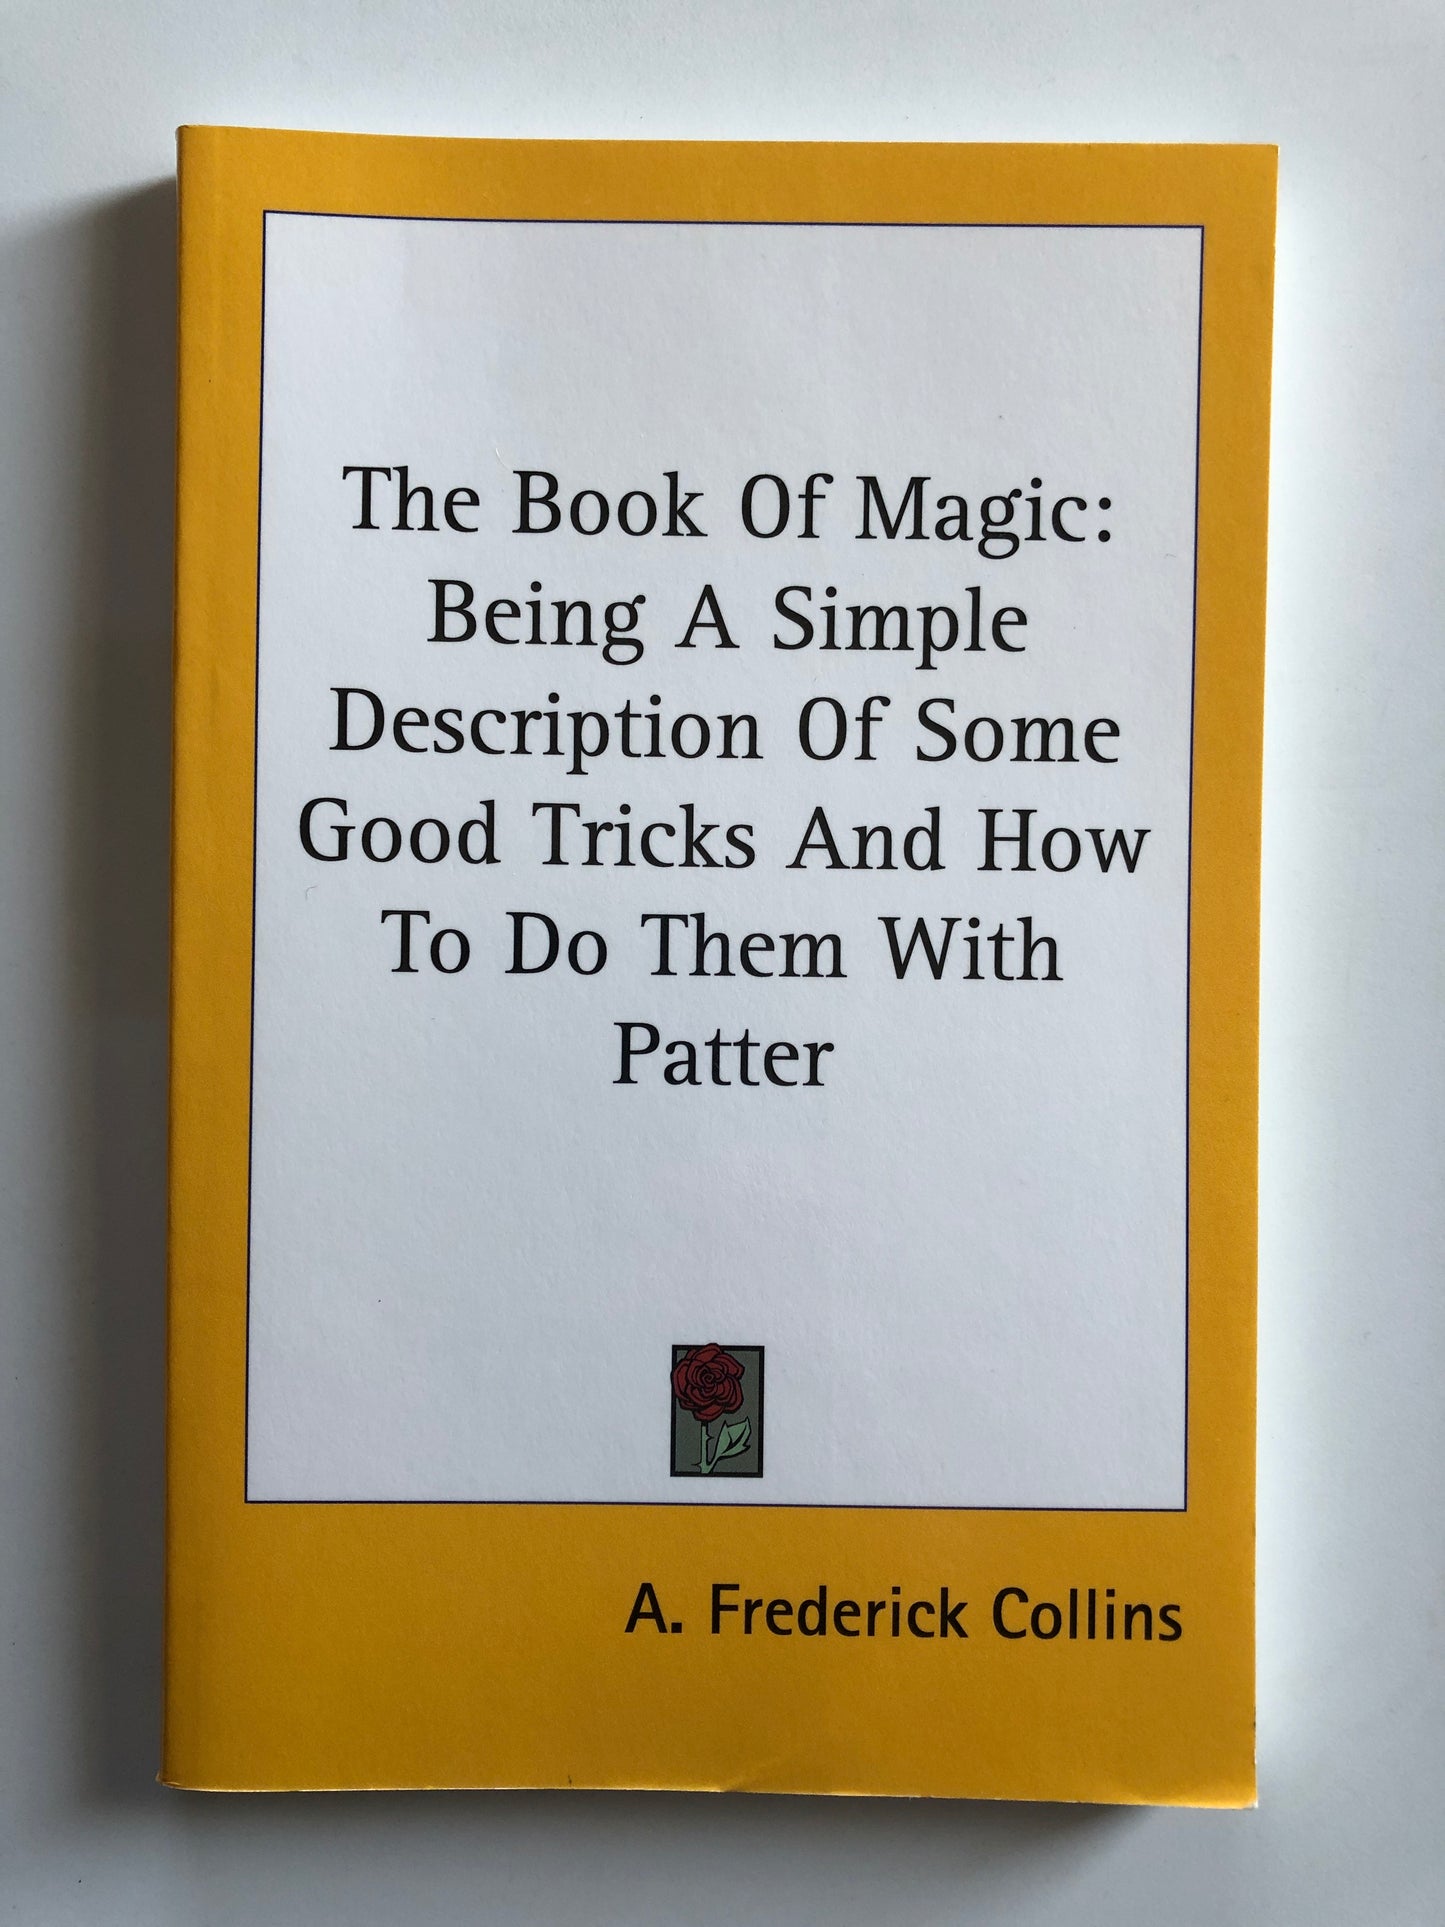 The Book of Magic: Being A Simple Description of SOme Good Tricks And How to do them With Patter - A. Fredick Collins